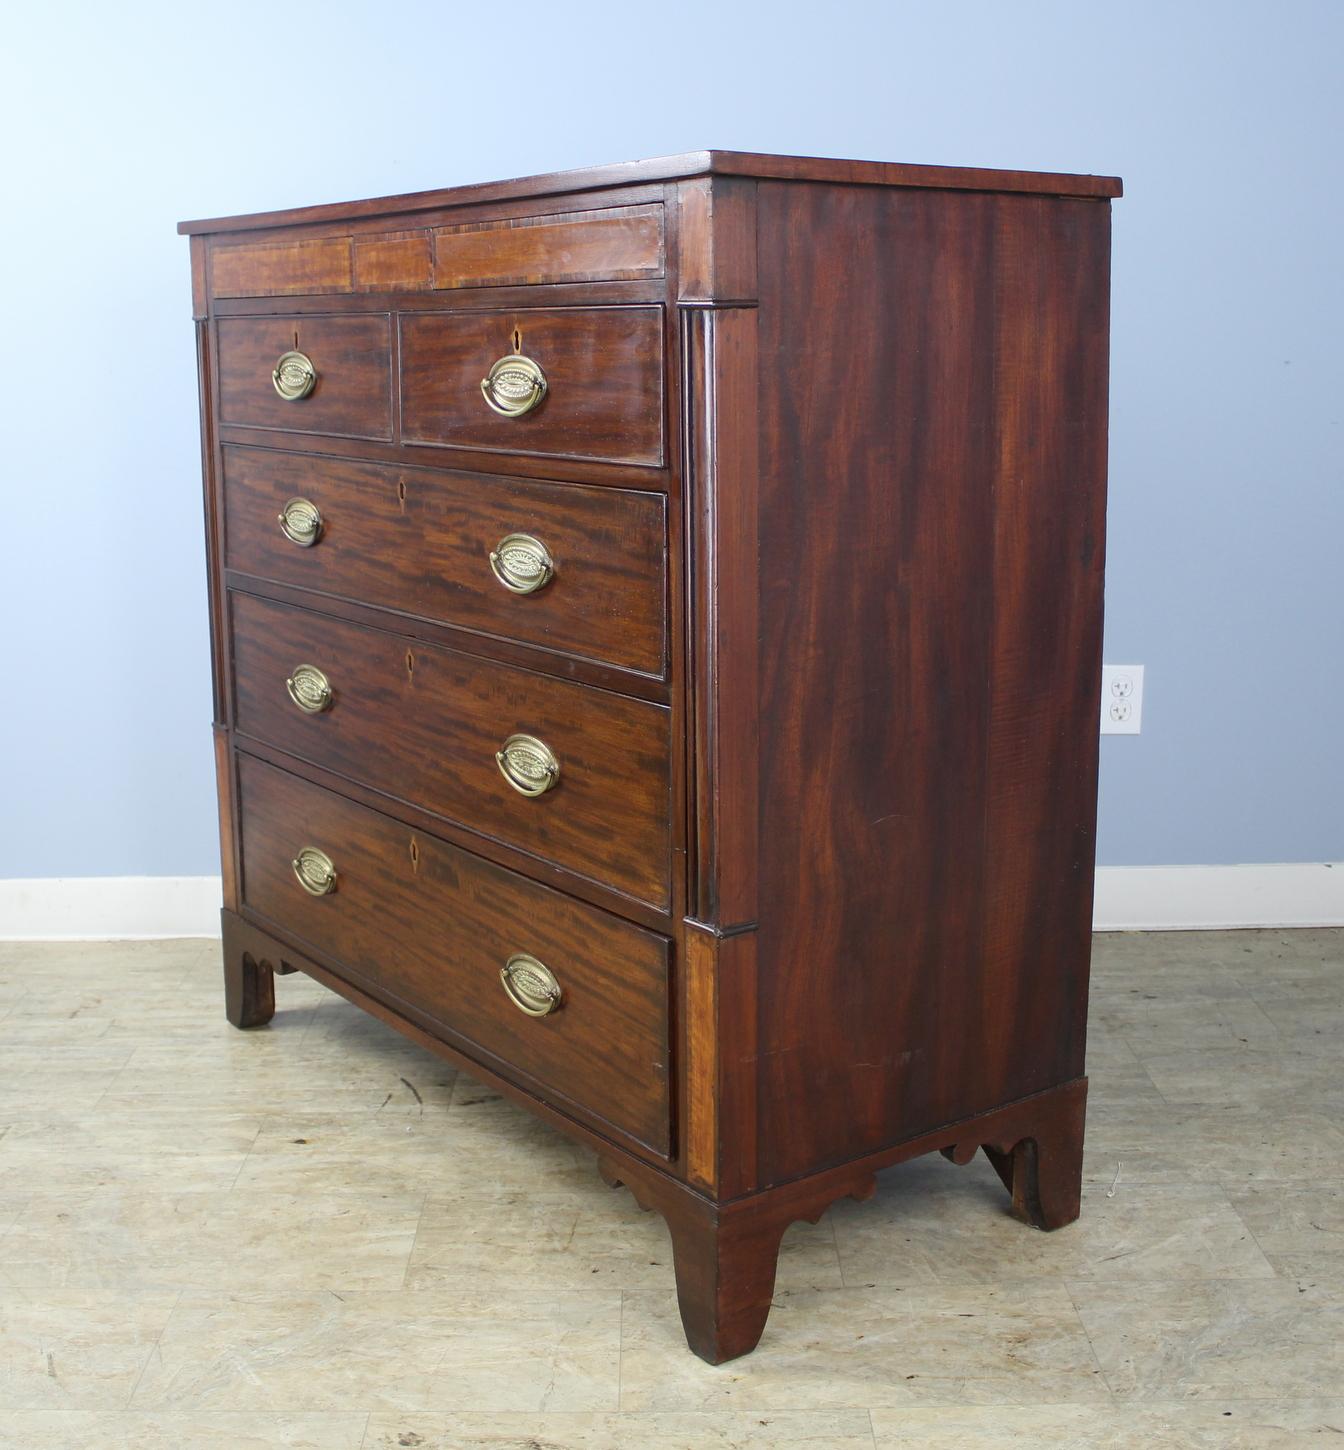 An early mahogany chest of drawers with lots of good period details. The top has a wide decorative band of ebony stringing, and there is an abundance of satinwood inlay around the drawers and keyholes. The drawers also have lovely intact cock